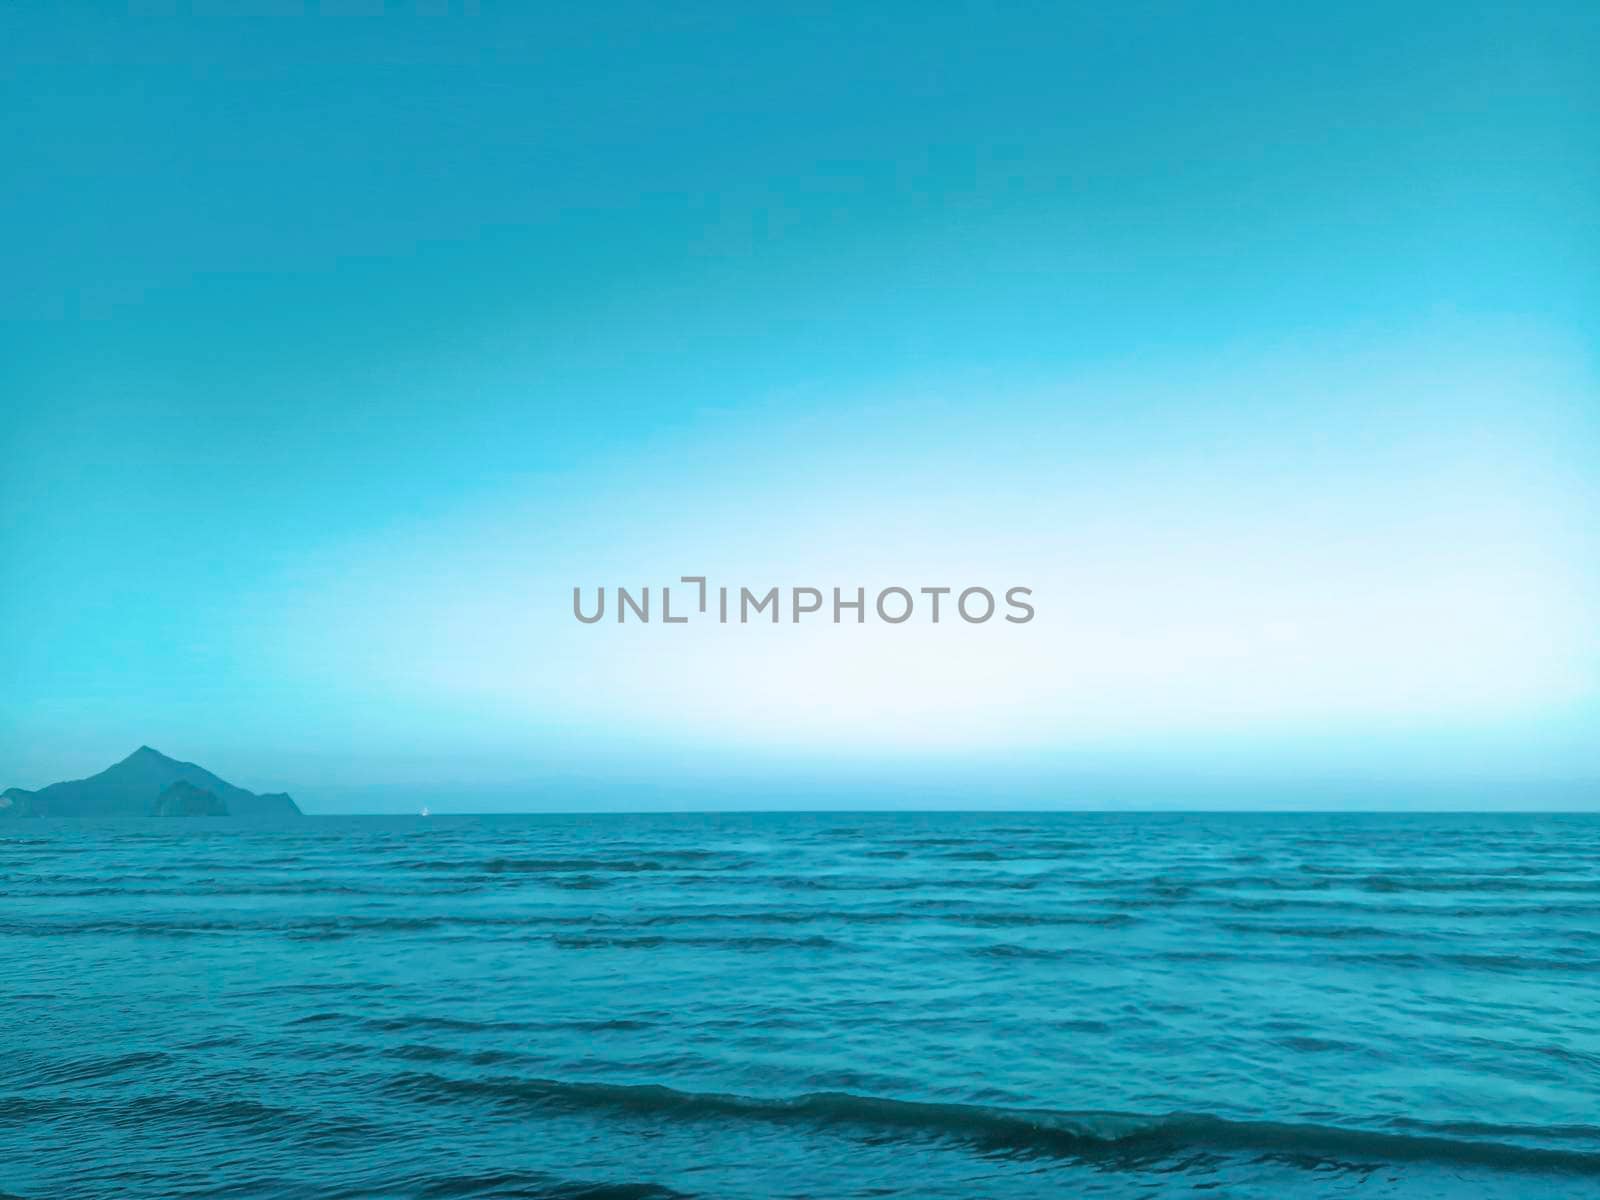 Sea and mountains landscape with blue gradient color. Summer holiday idea nature background